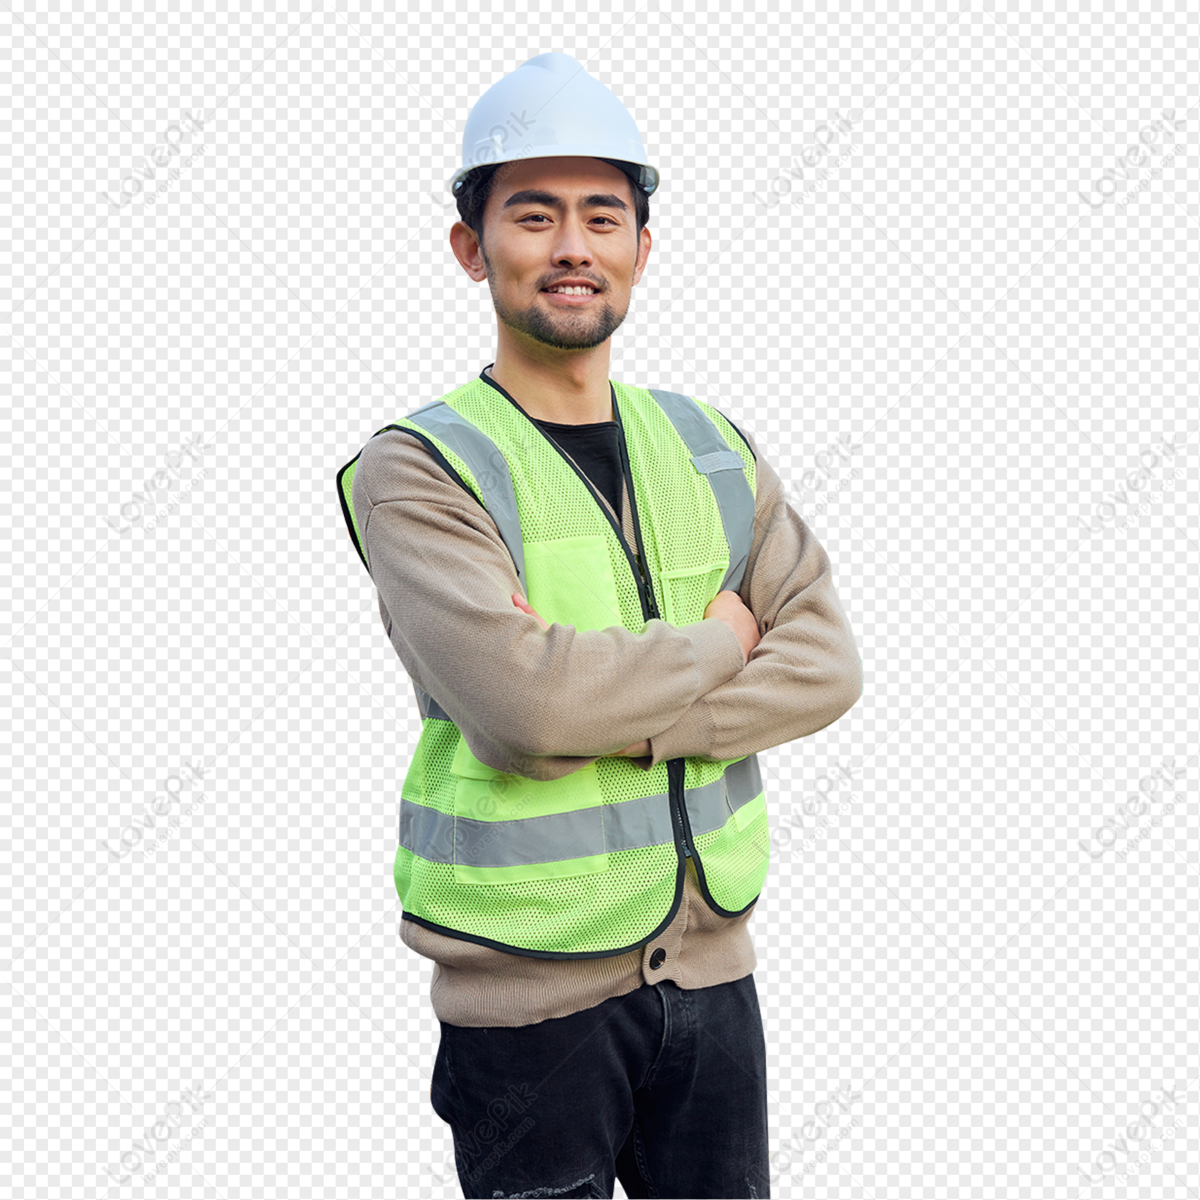 Surveying Engineering PNG Images With Transparent Background | Free ...